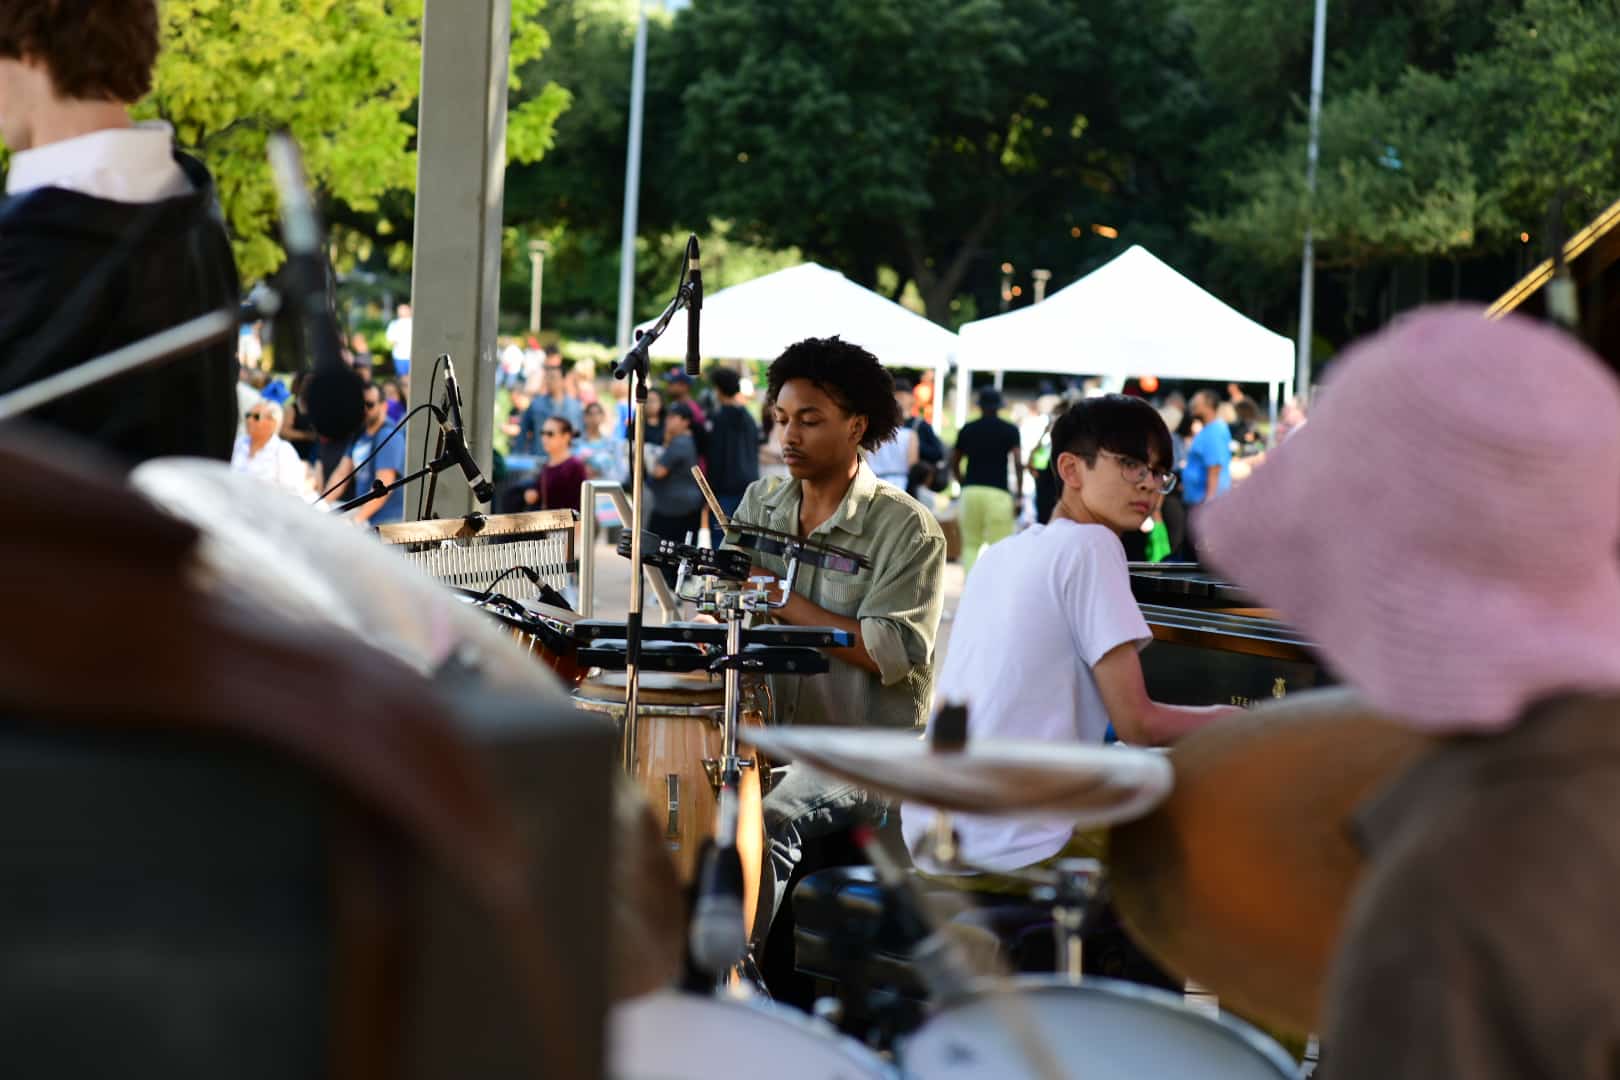 Members of The Stuart Adams Collective perform at Discovery Green during Jazzy Sundays in the Parks. Photo by Jamaal Ellis.